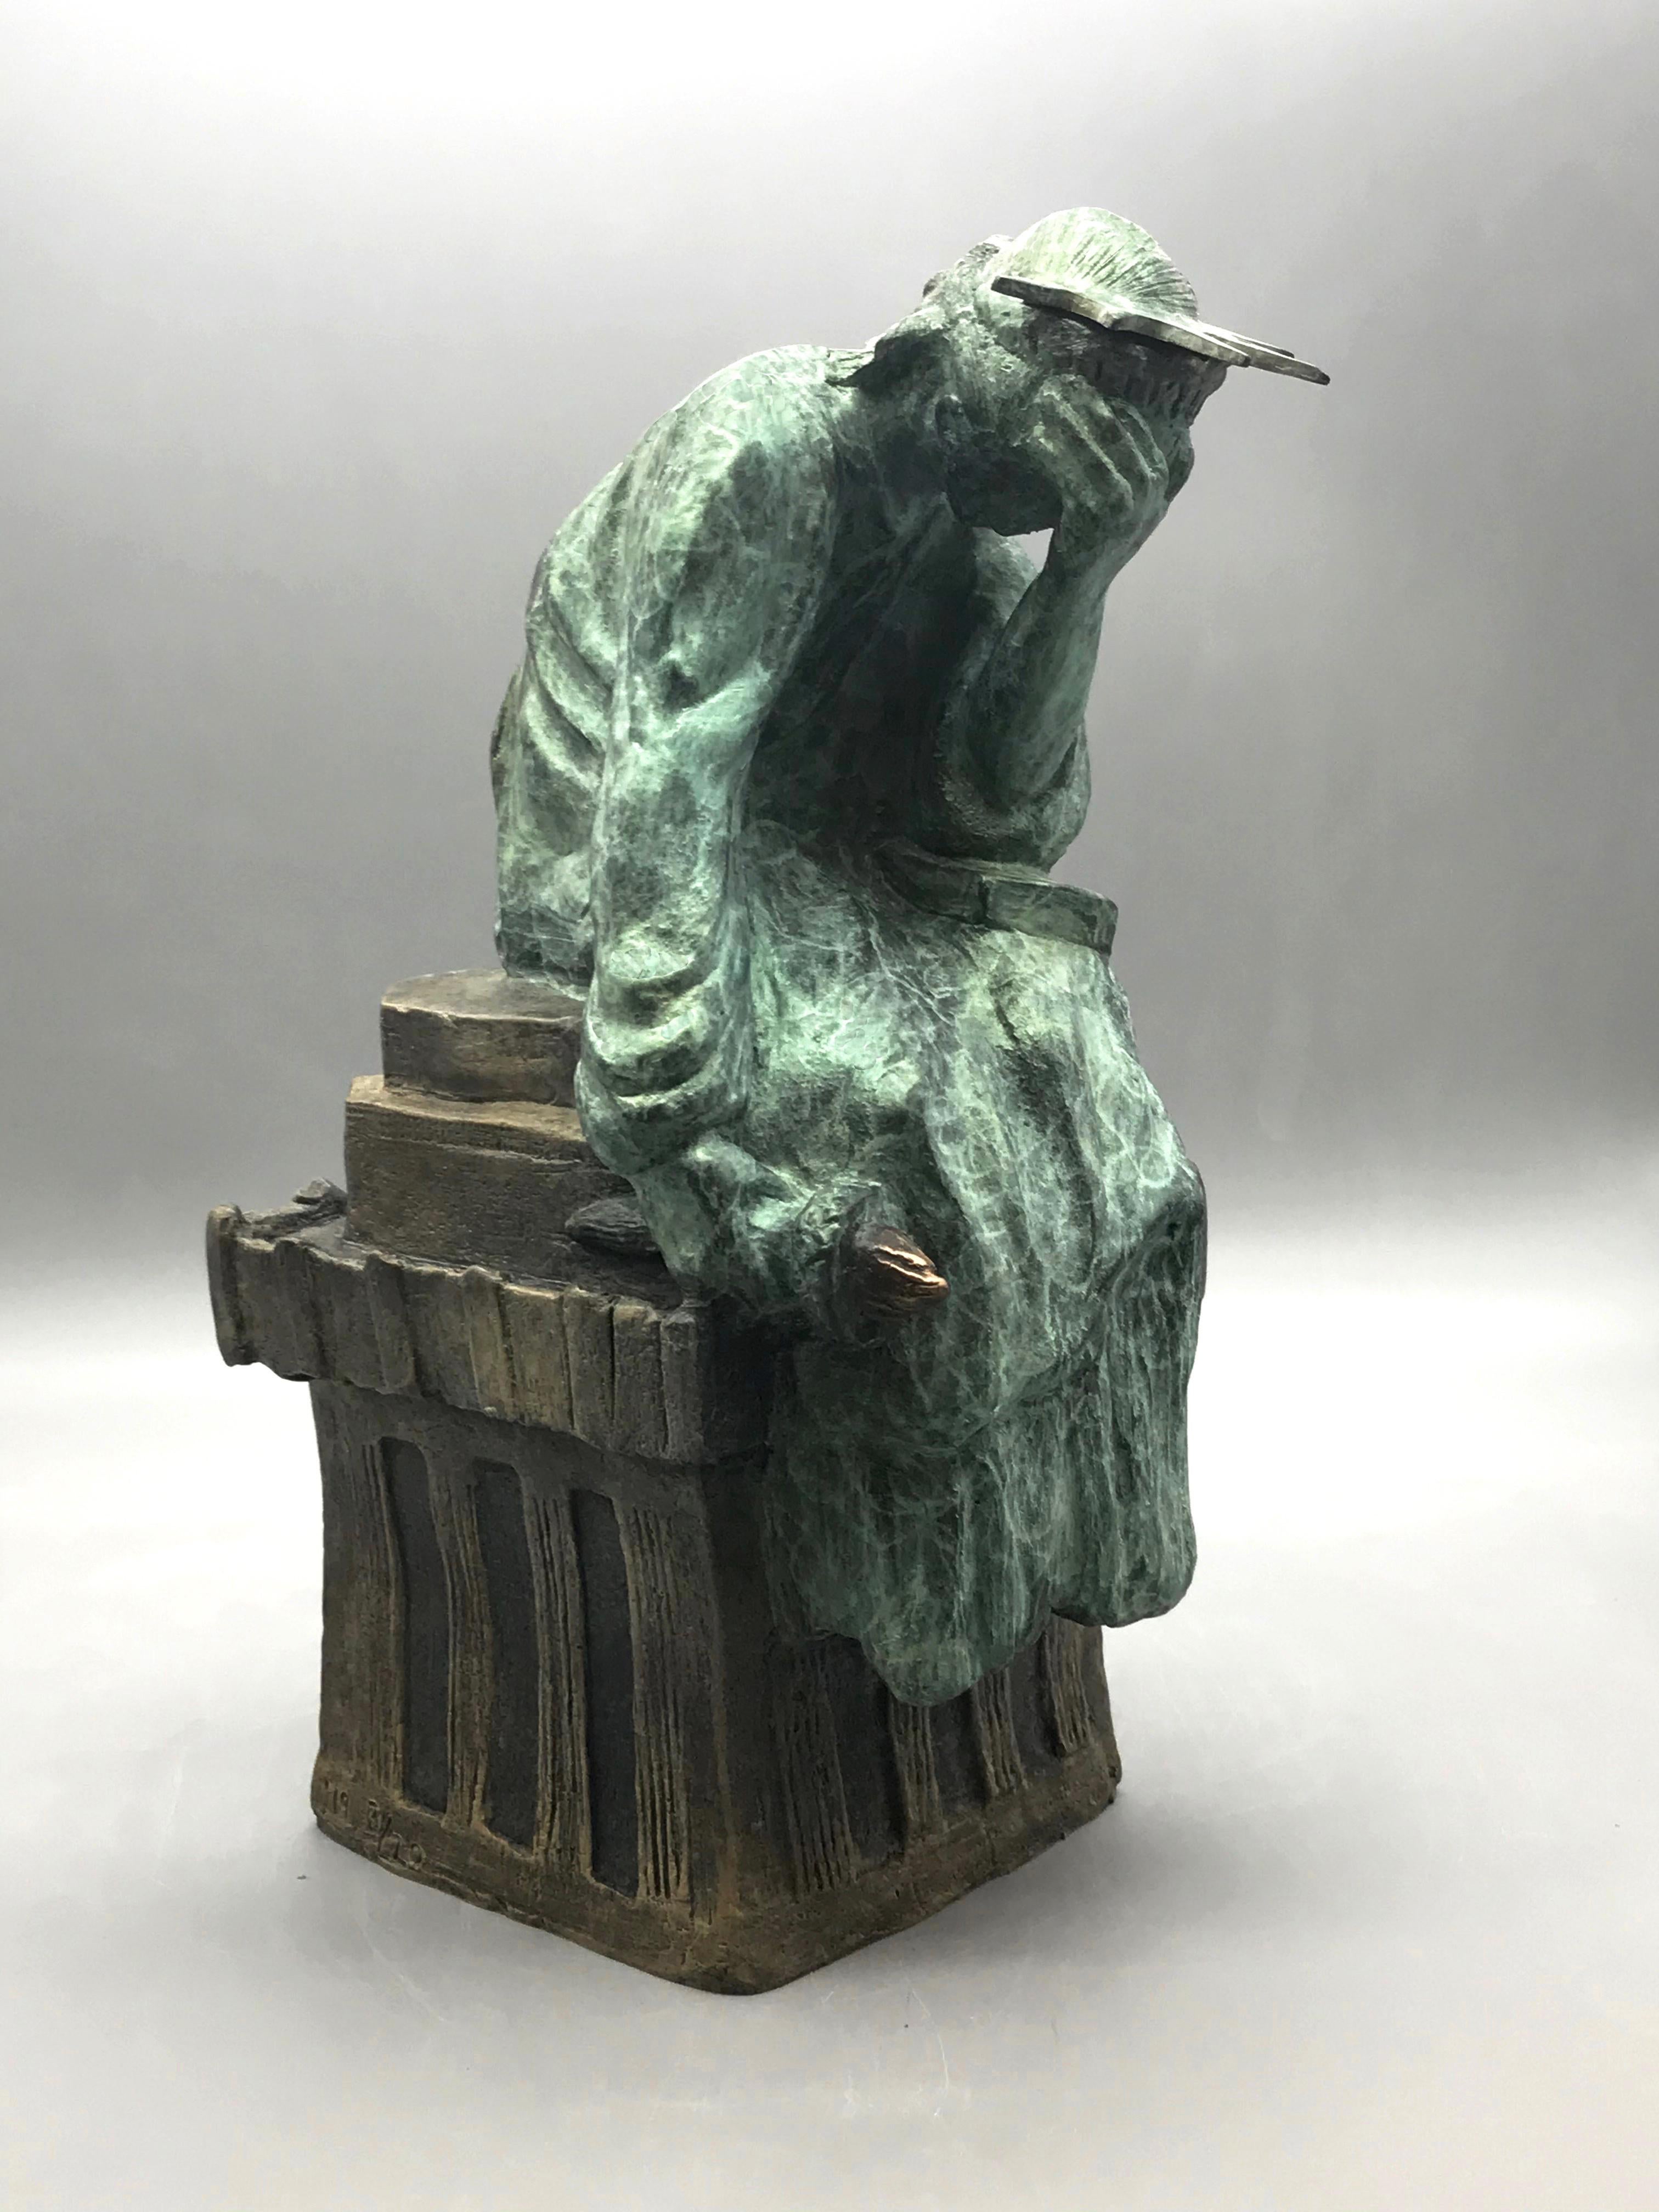 Judy Bolef Miller Figurative Sculpture - "Liberty and Justice" a humorous sculptural take on the Statue of Liberty